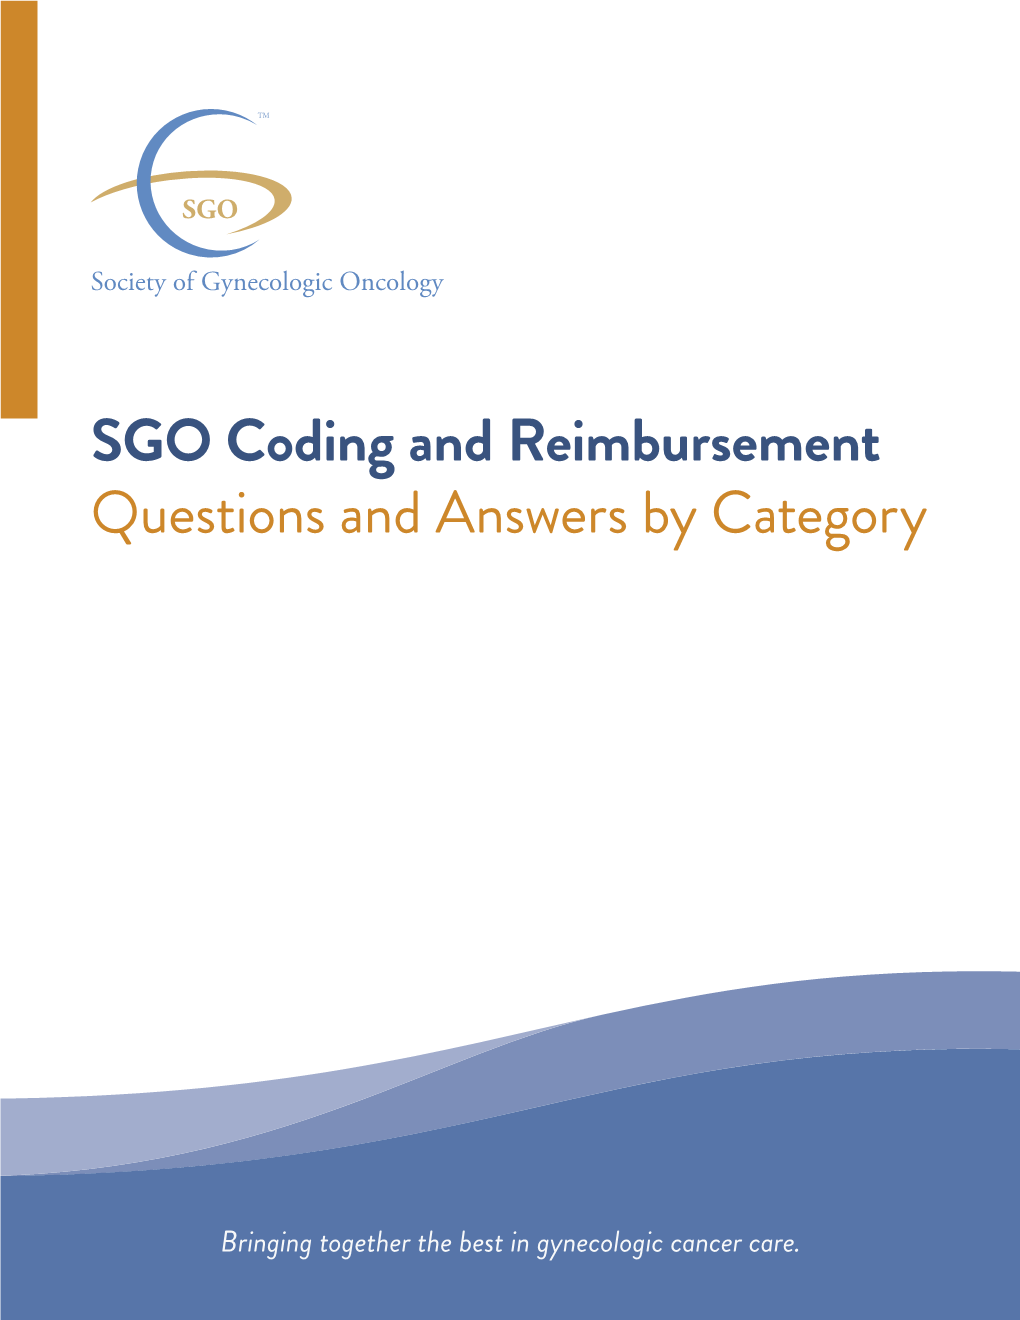 SGO Coding and Reimbursement Questions and Answers by Category